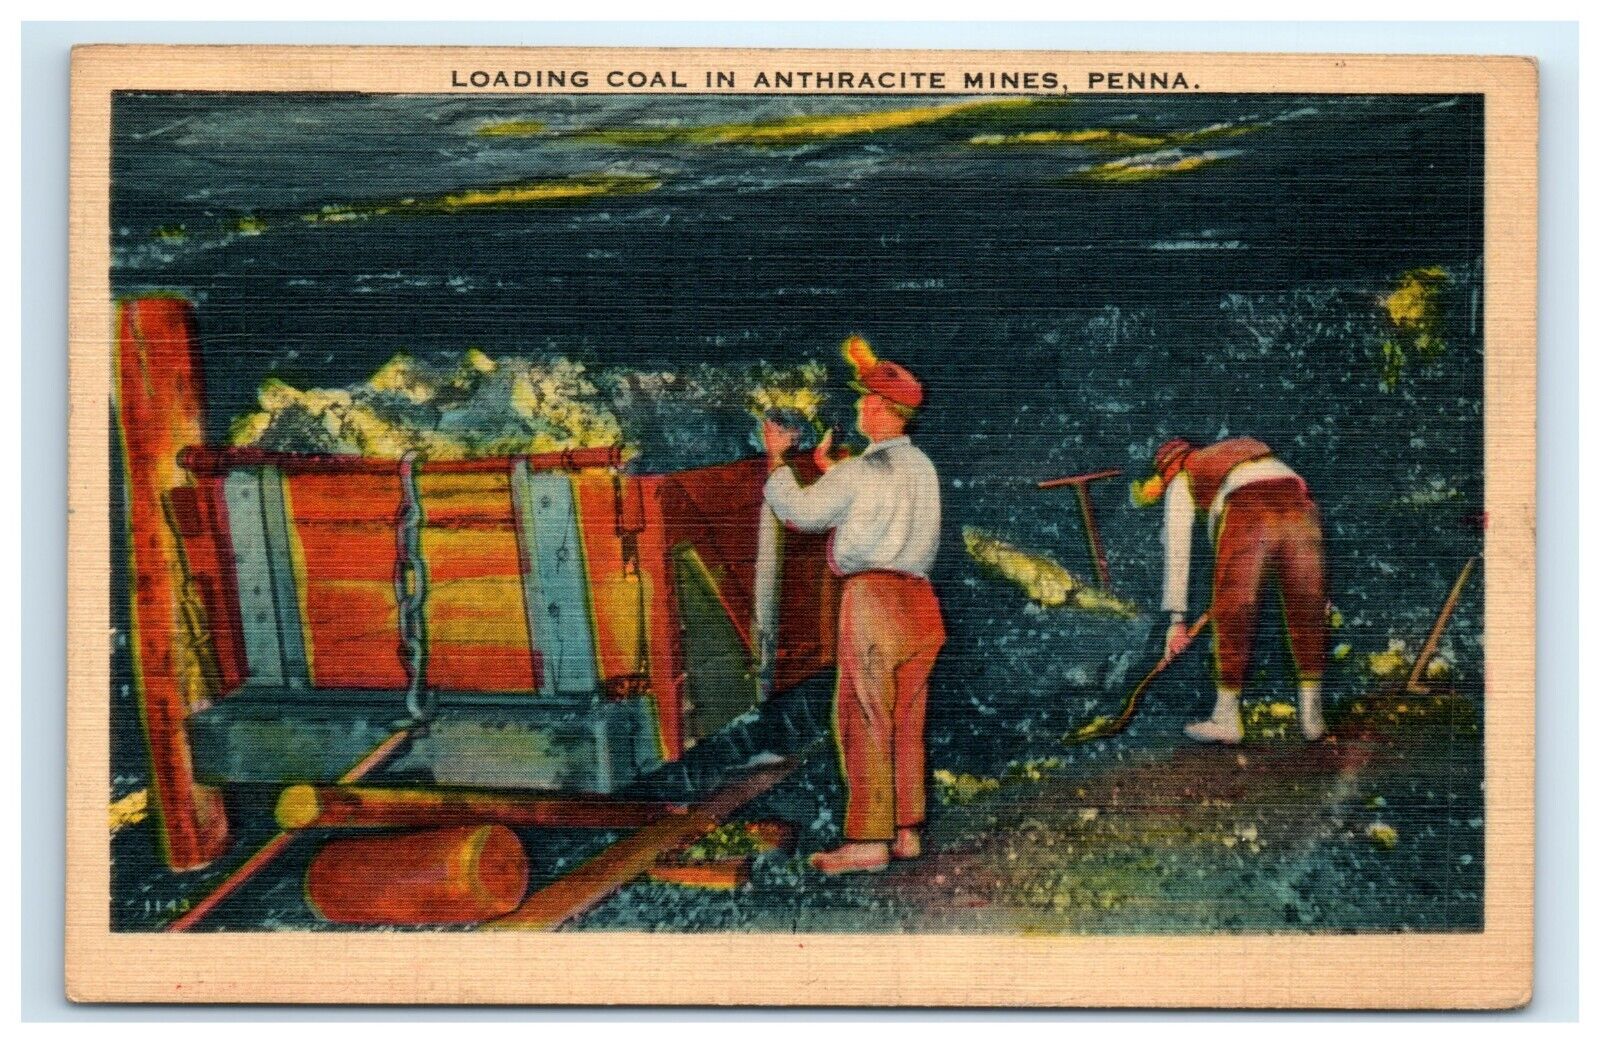 Vintage Postcard LOADING COAL IN ANTHRACITE MINES Pennsylvania Travel Posted